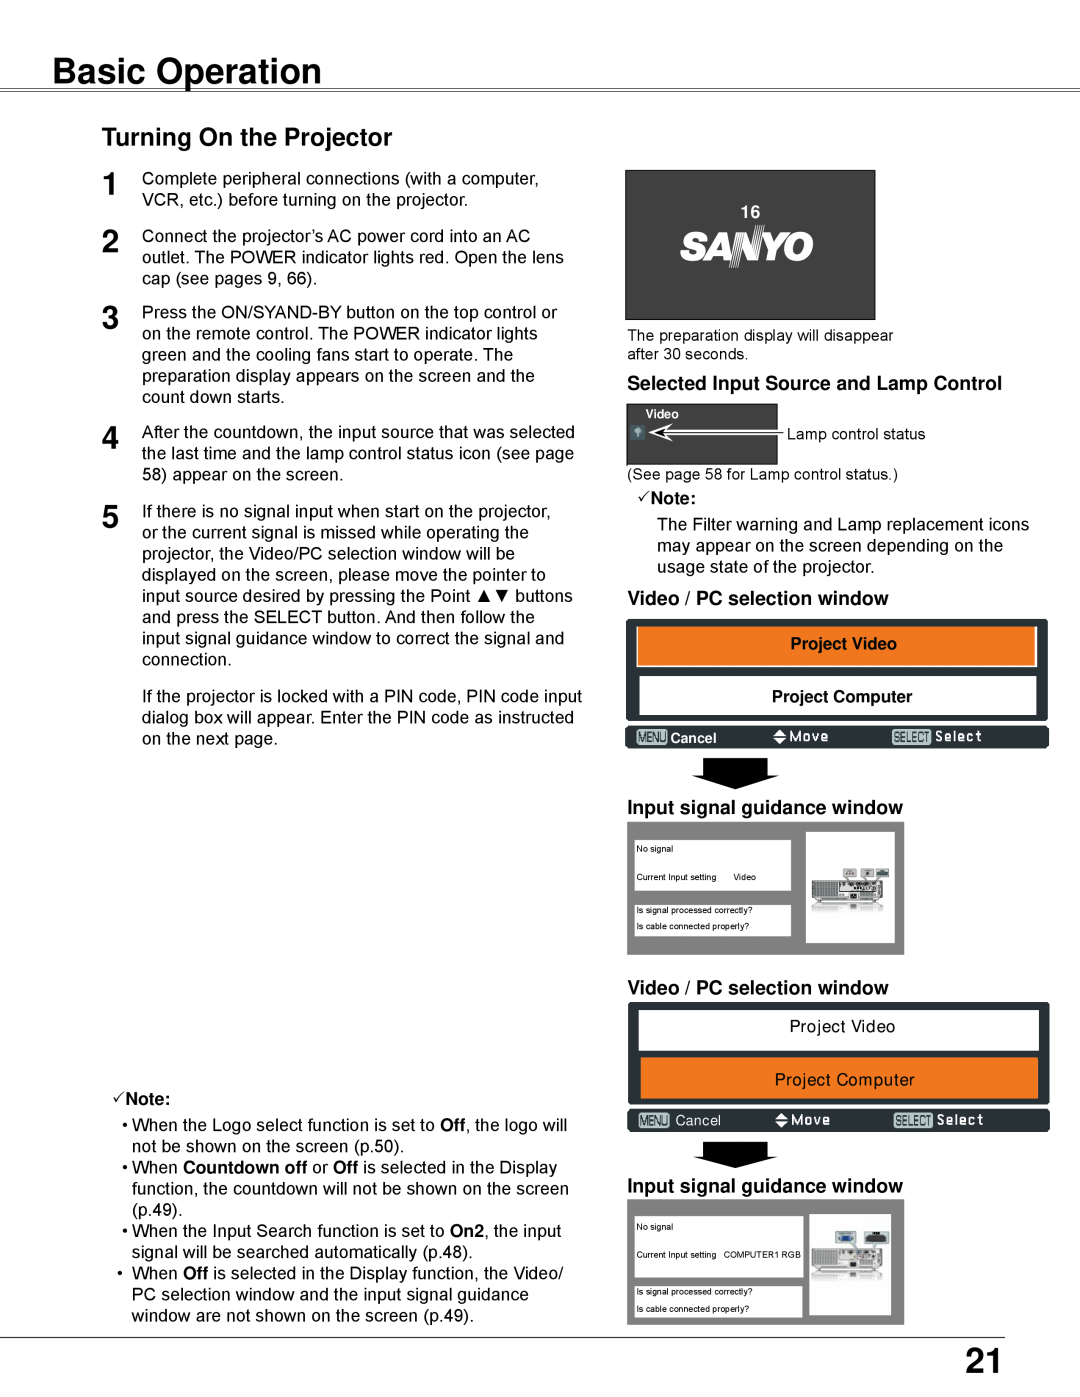 Sanyo PLC-WXU700 owner manual Basic Operation, Turning On the Projector, Selected Input Source and Lamp Control, Note 